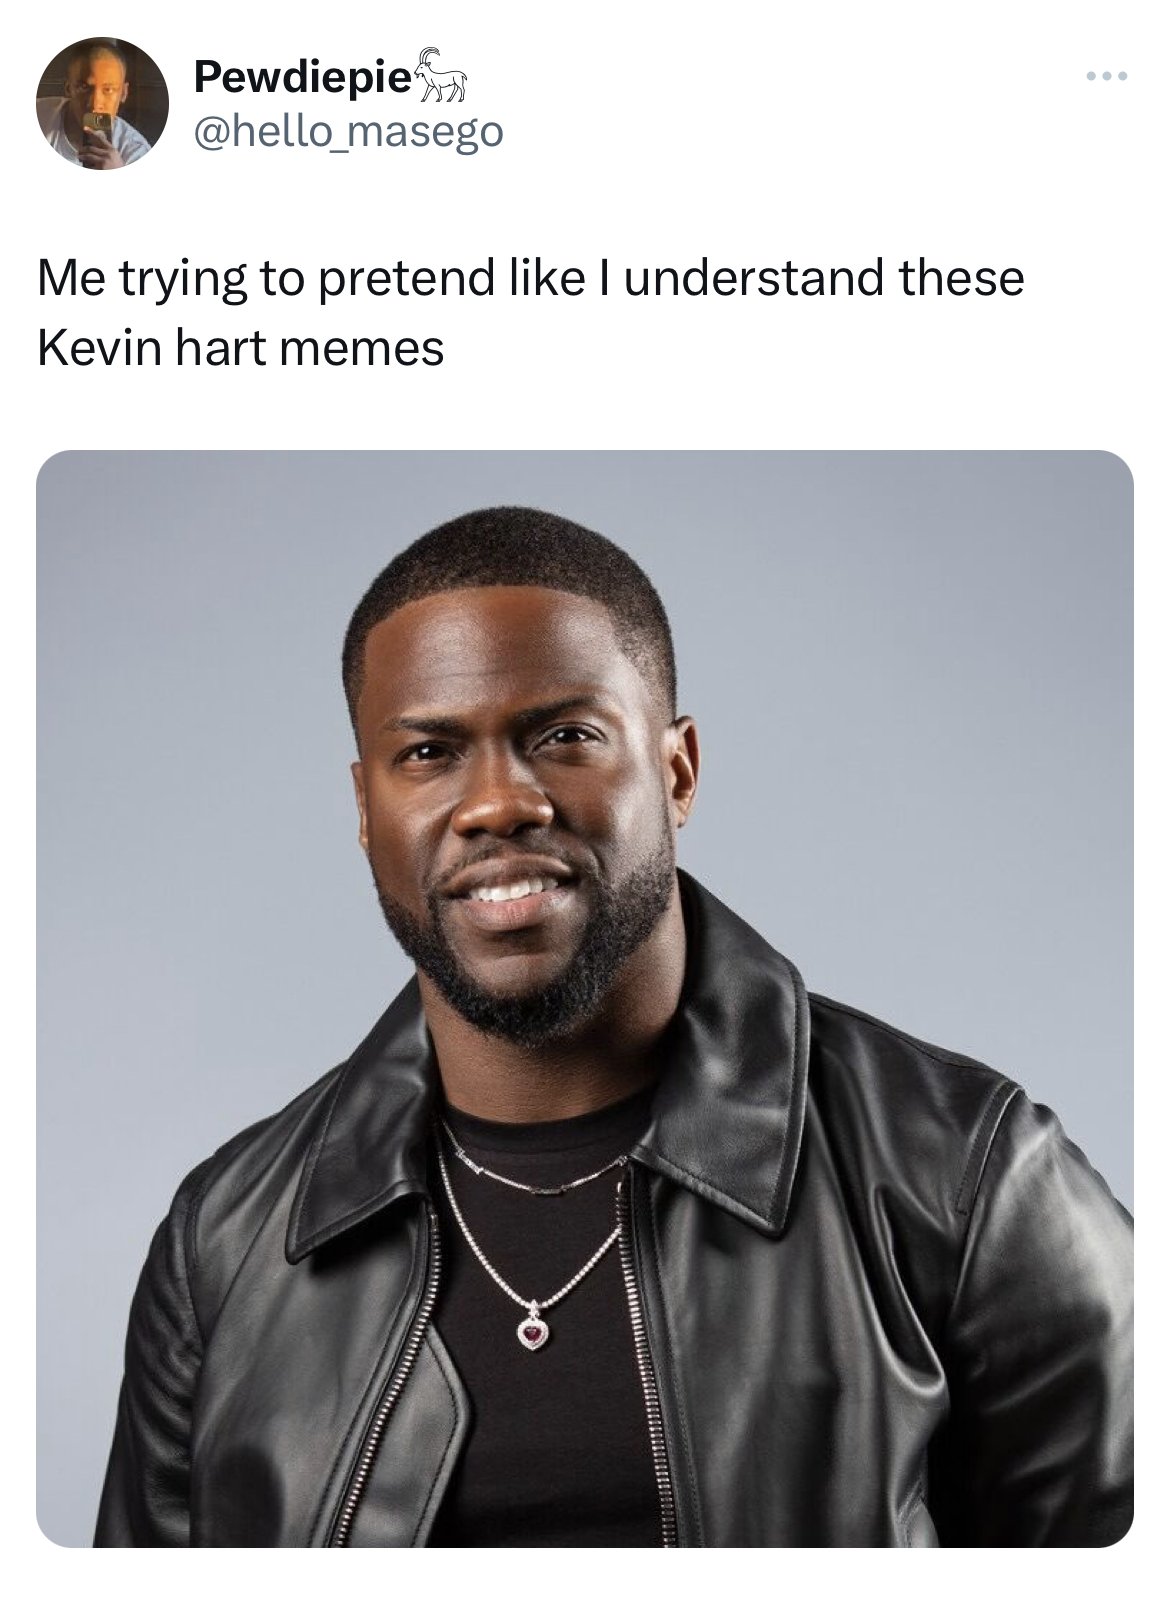 Kevin Hart trending memes - kevin hart cute - Pewdiepie Me trying to pretend I understand these vin hart memes